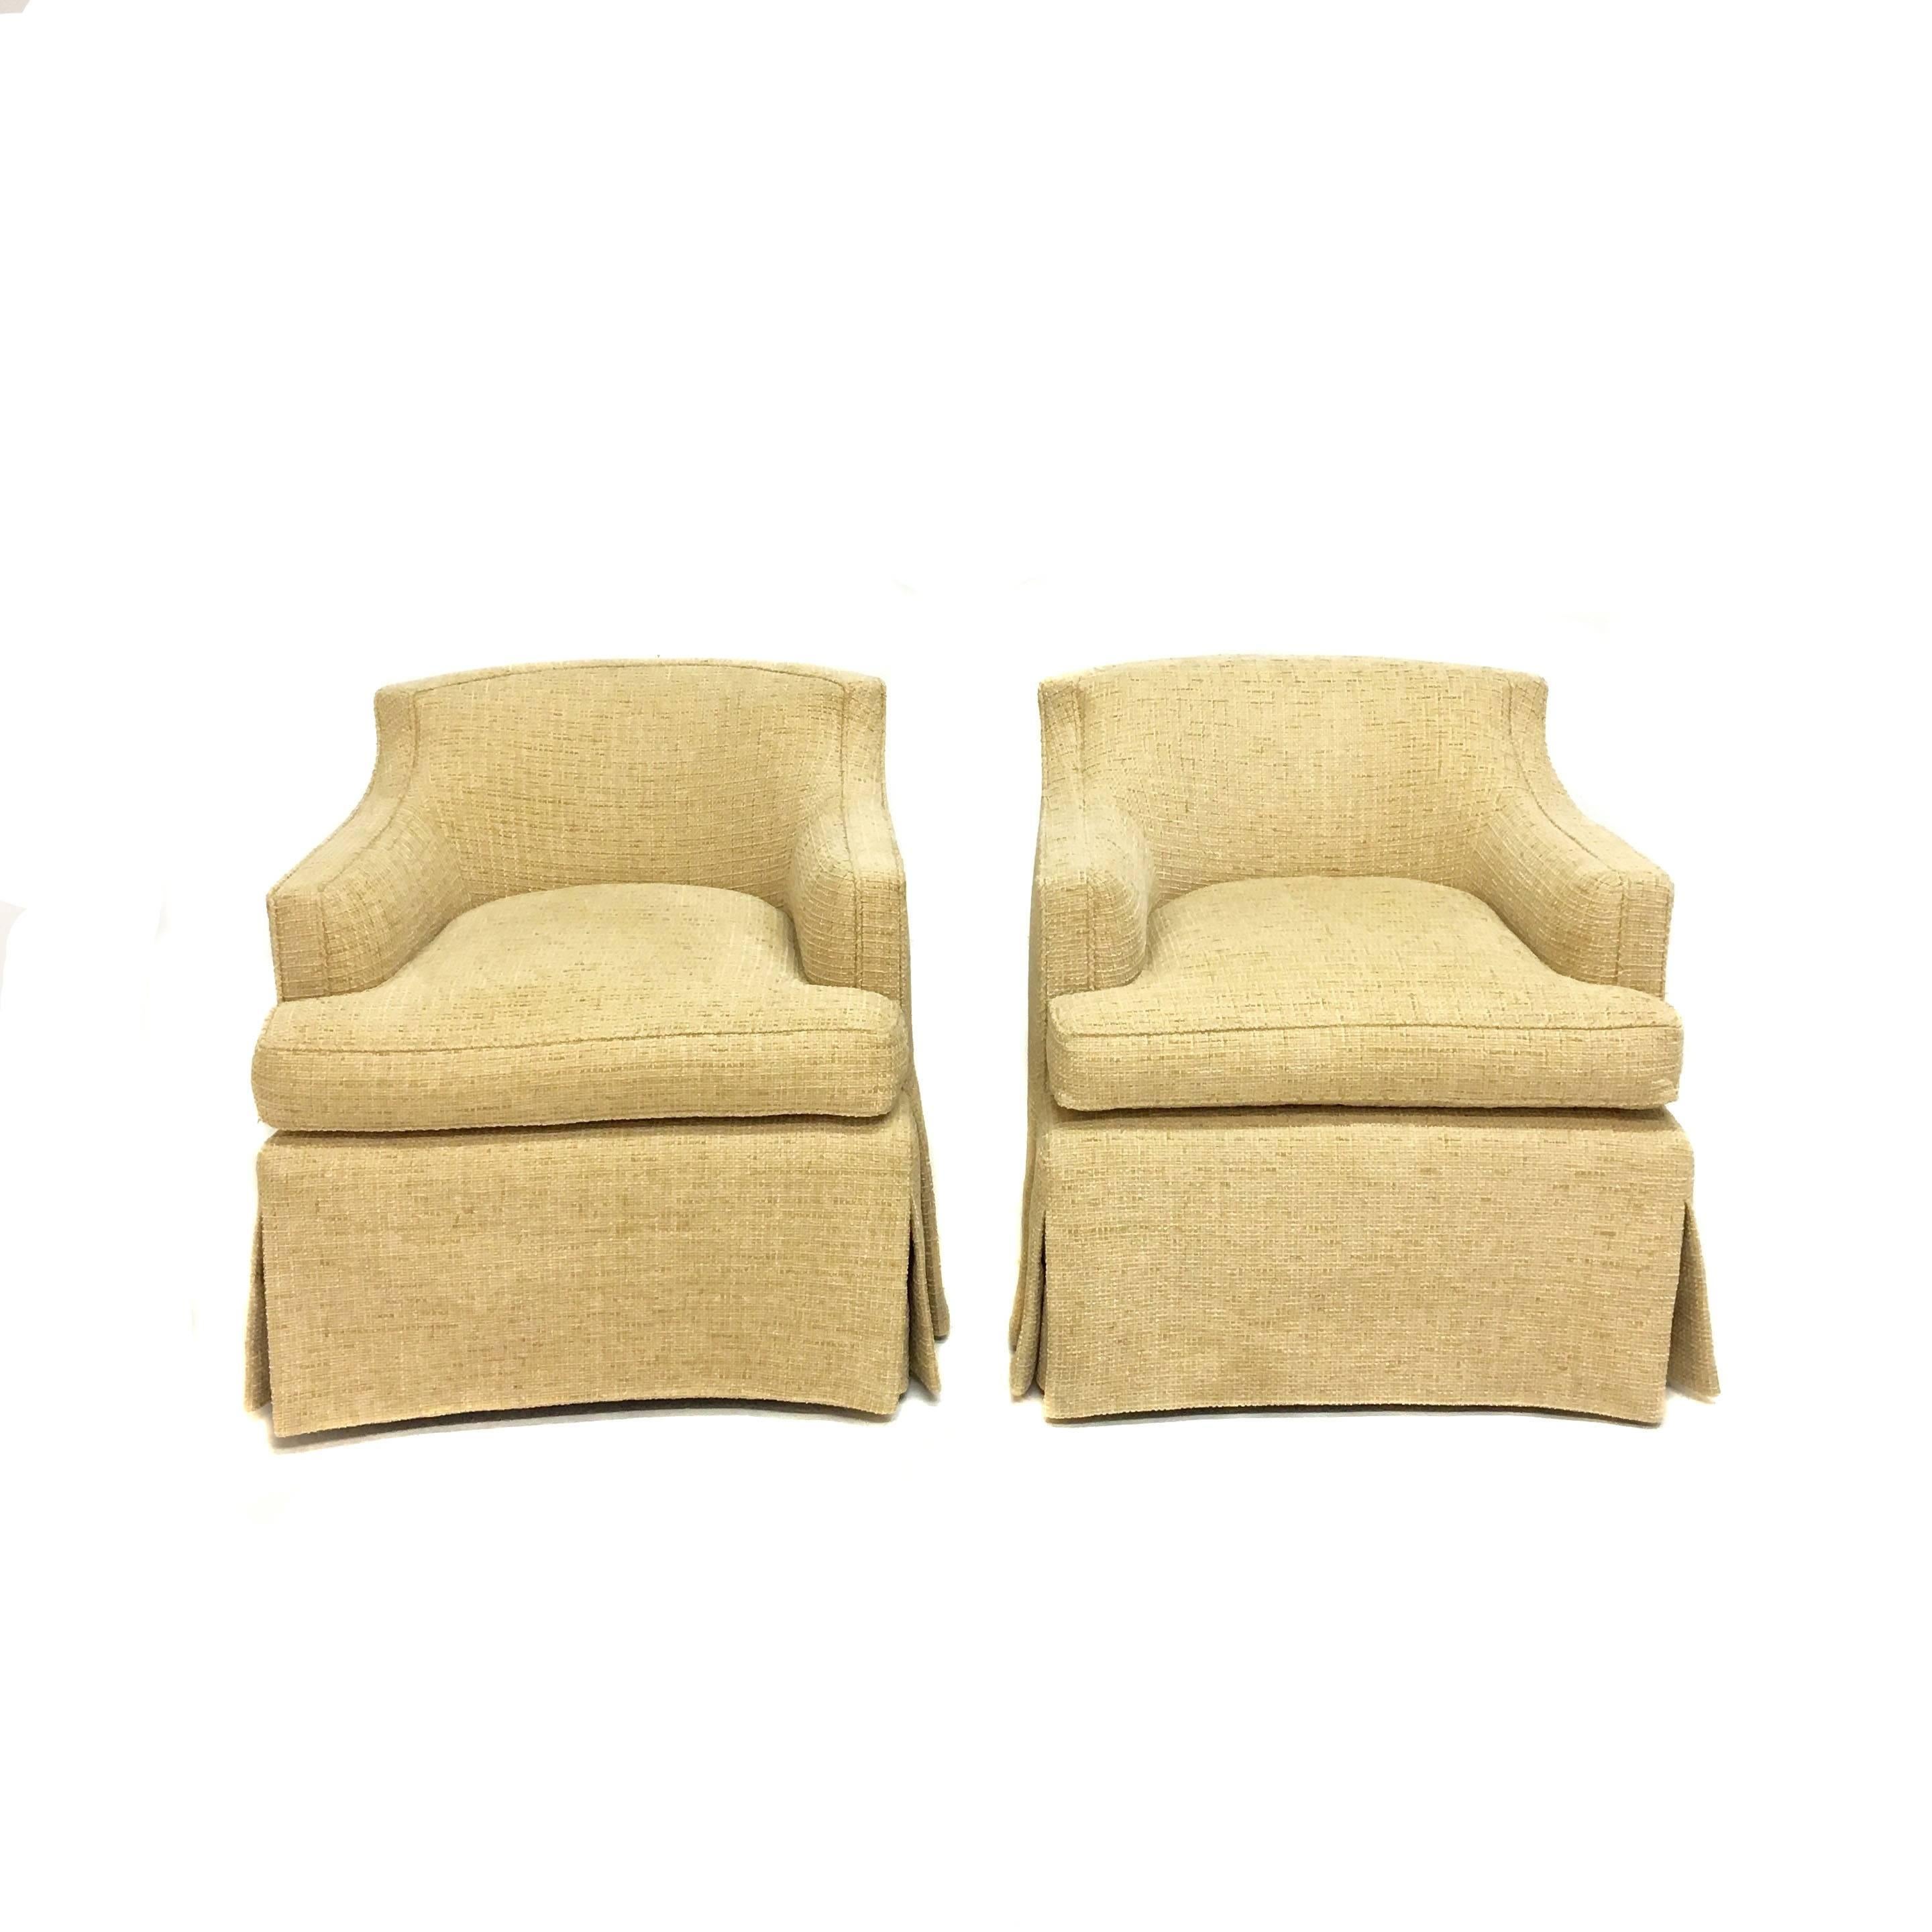 Upholstery Pair of Designer Upholstered Swivel Club Chairs